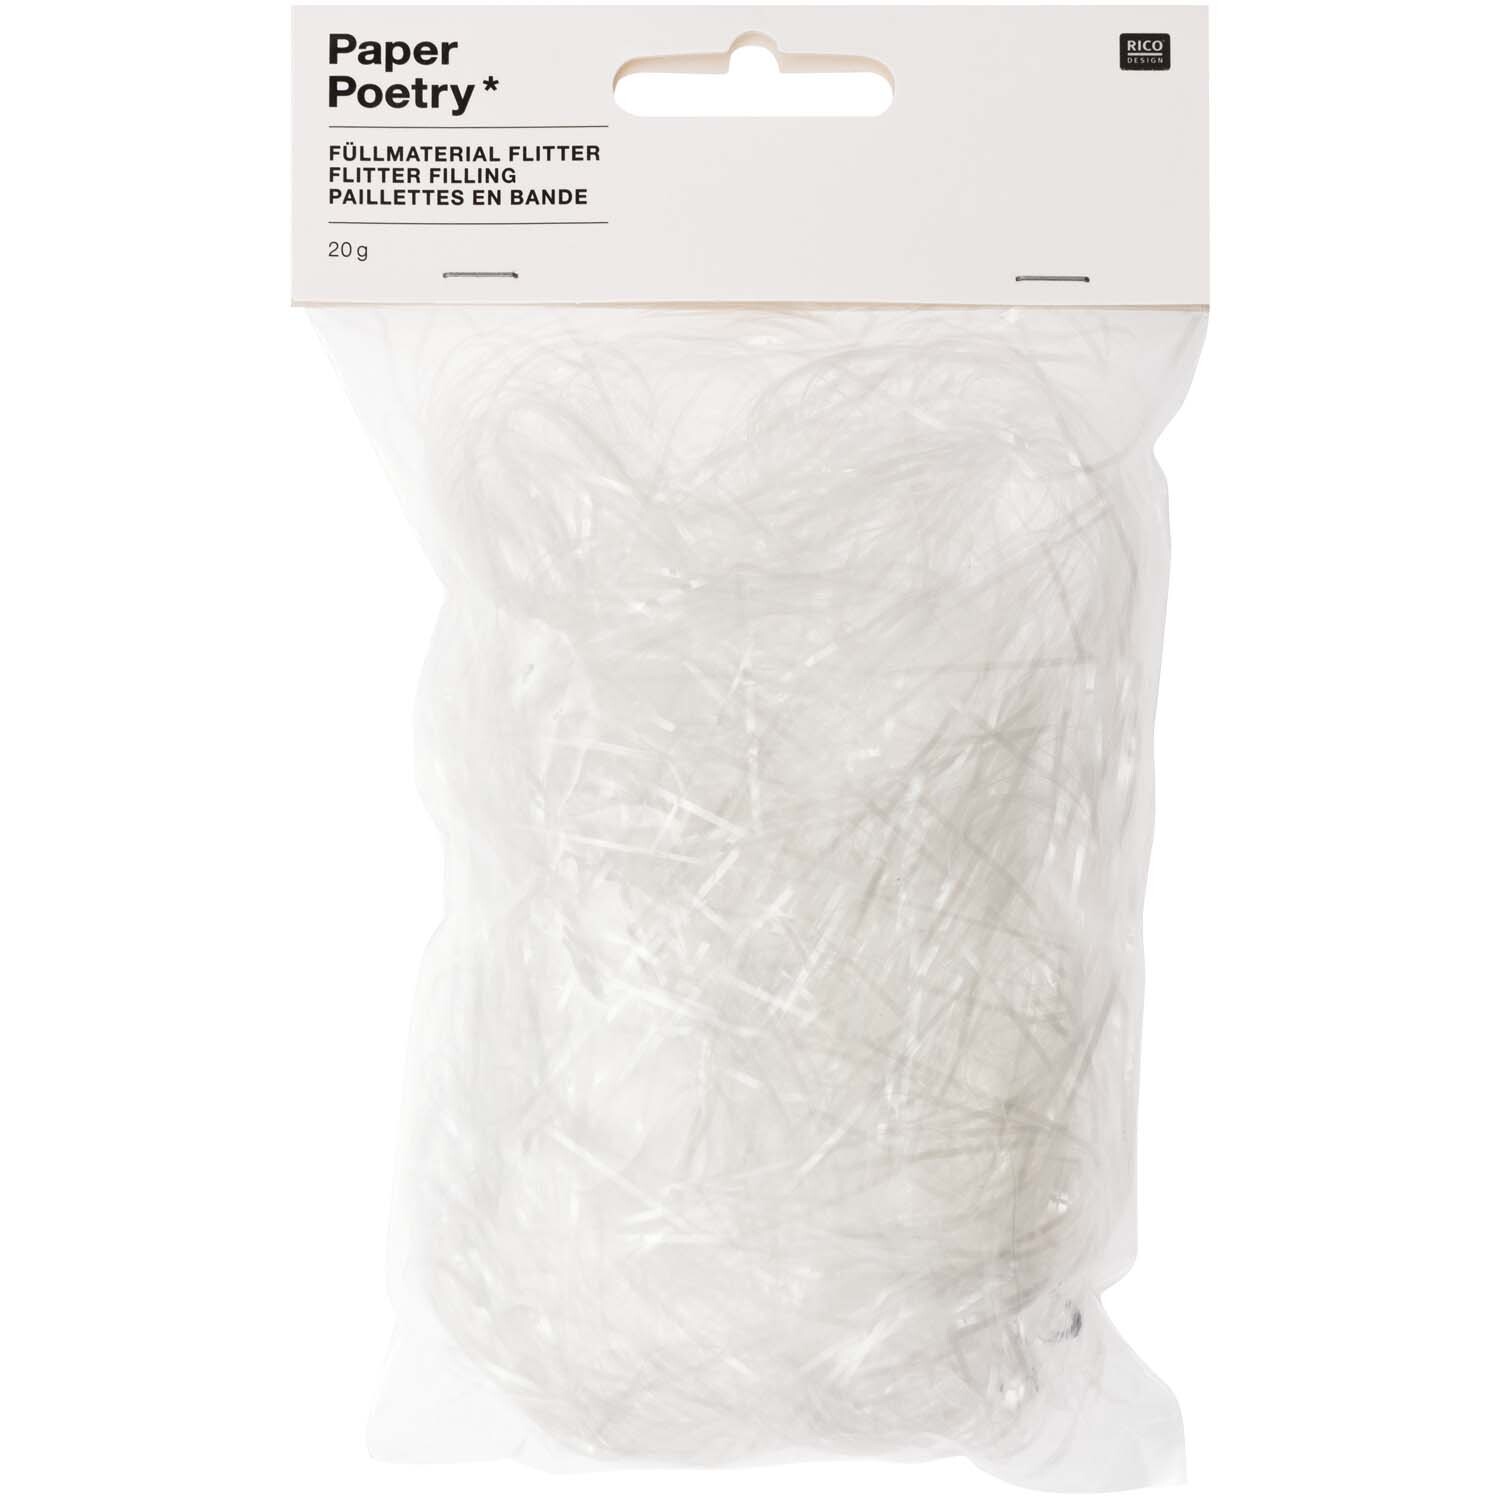 Paper Poetry Füllmaterial Flitter 20g